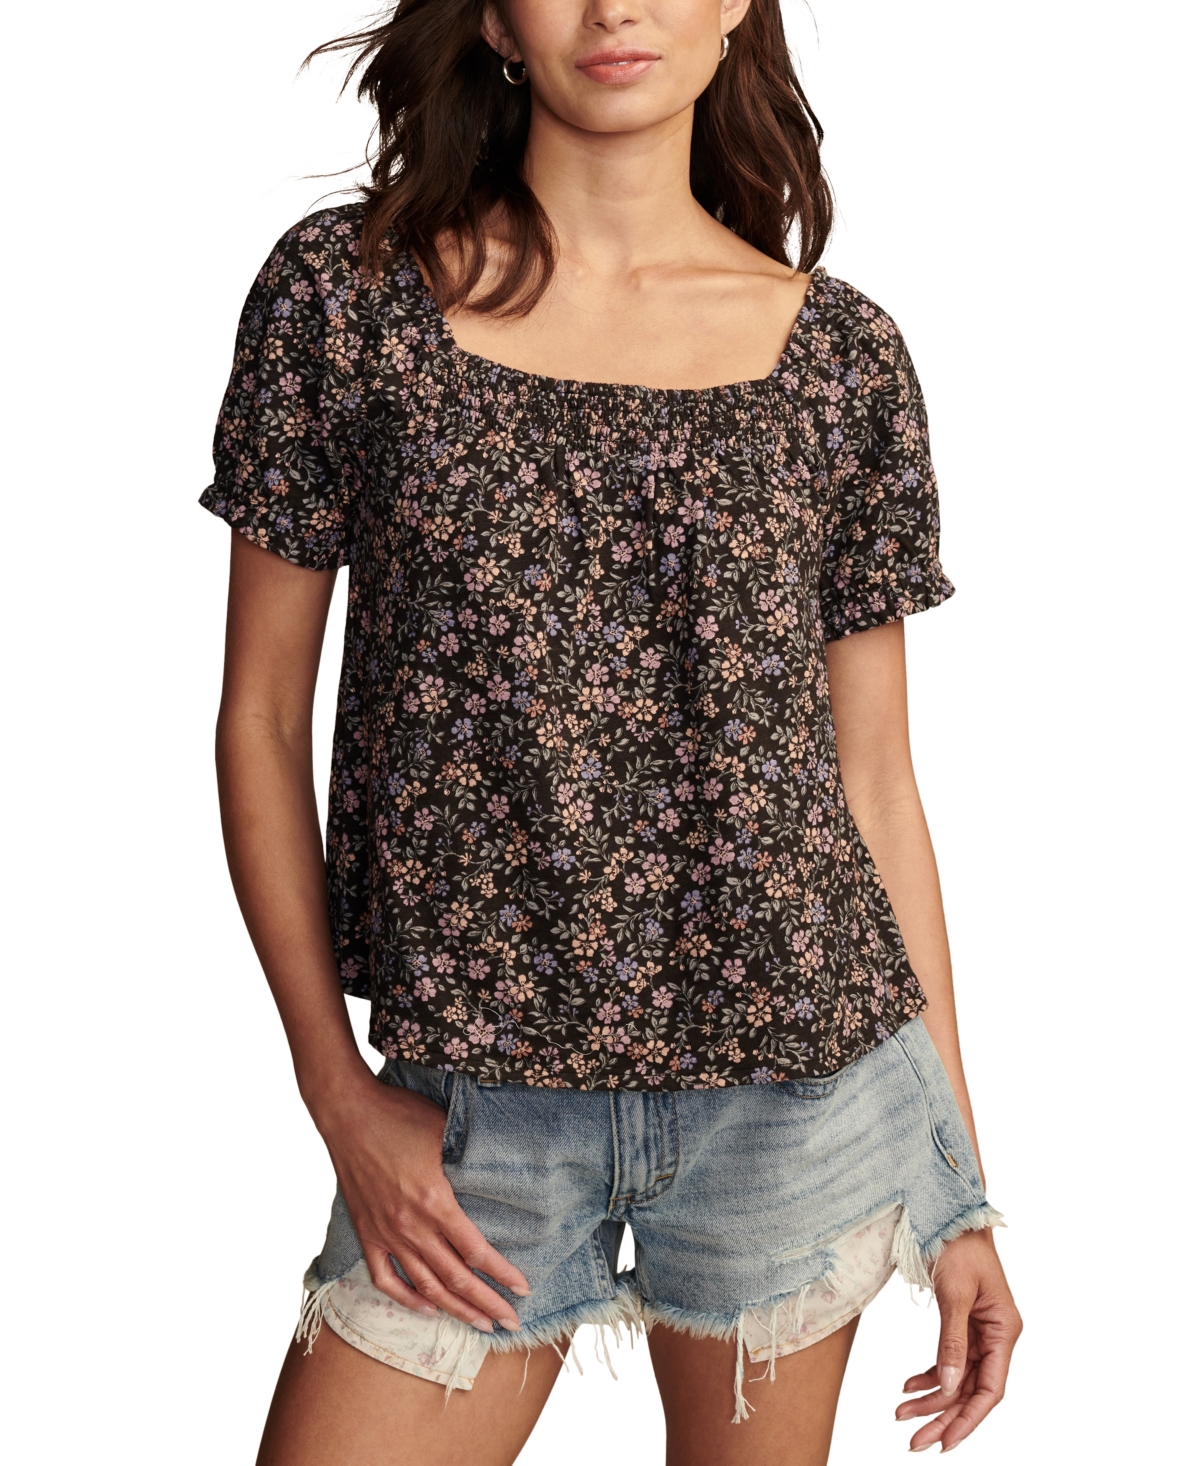 Women's Cotton Printed Short-Sleeve Top - Cream Floral